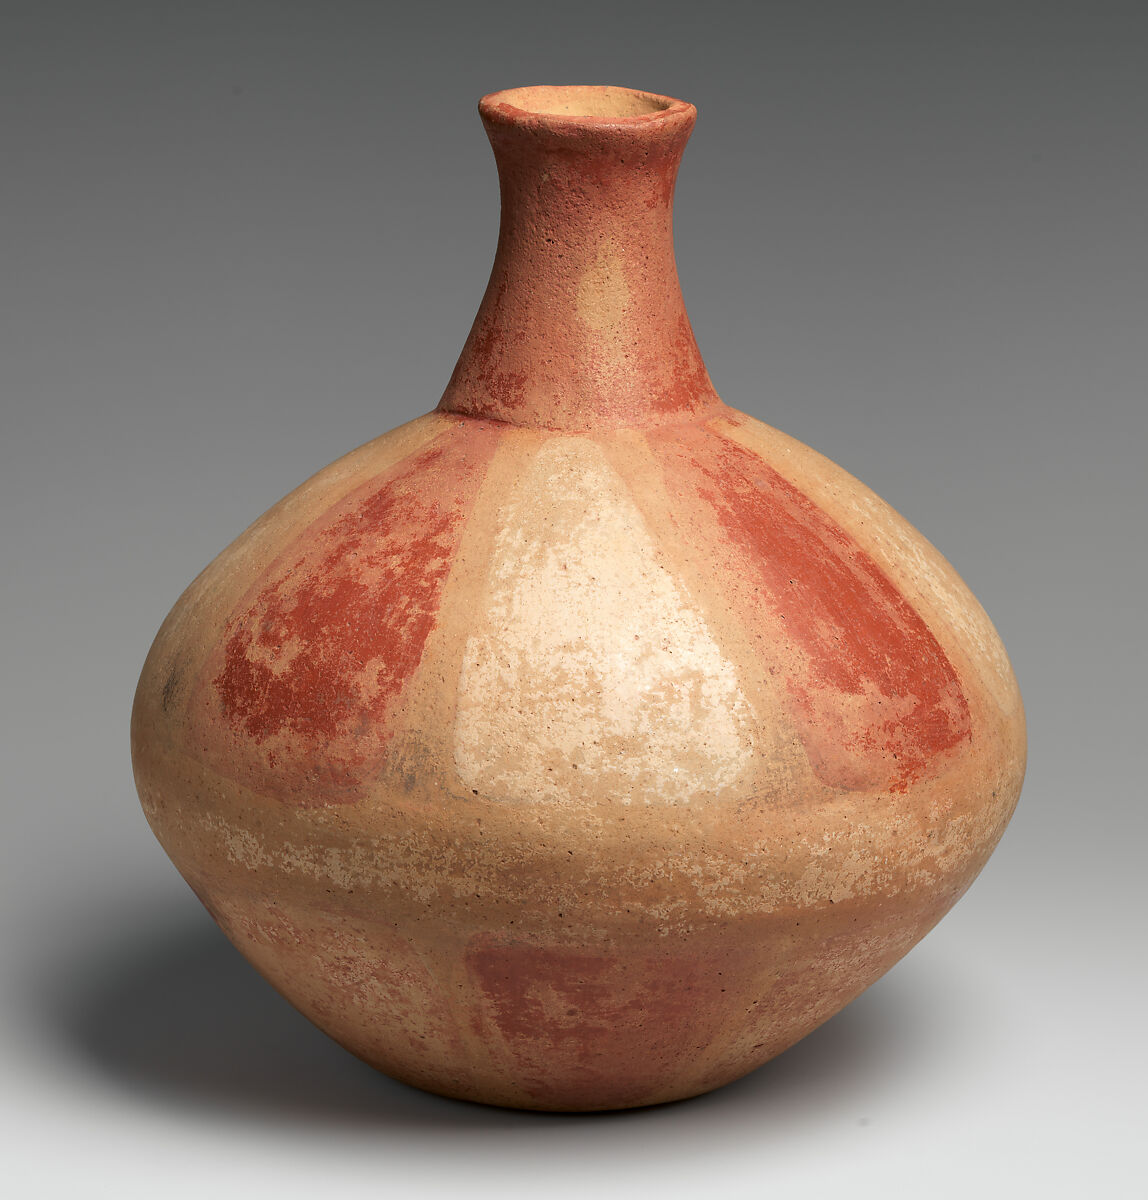 Polychrome Bottle, Clay, Mississippian (Ancestral Quapaw) 